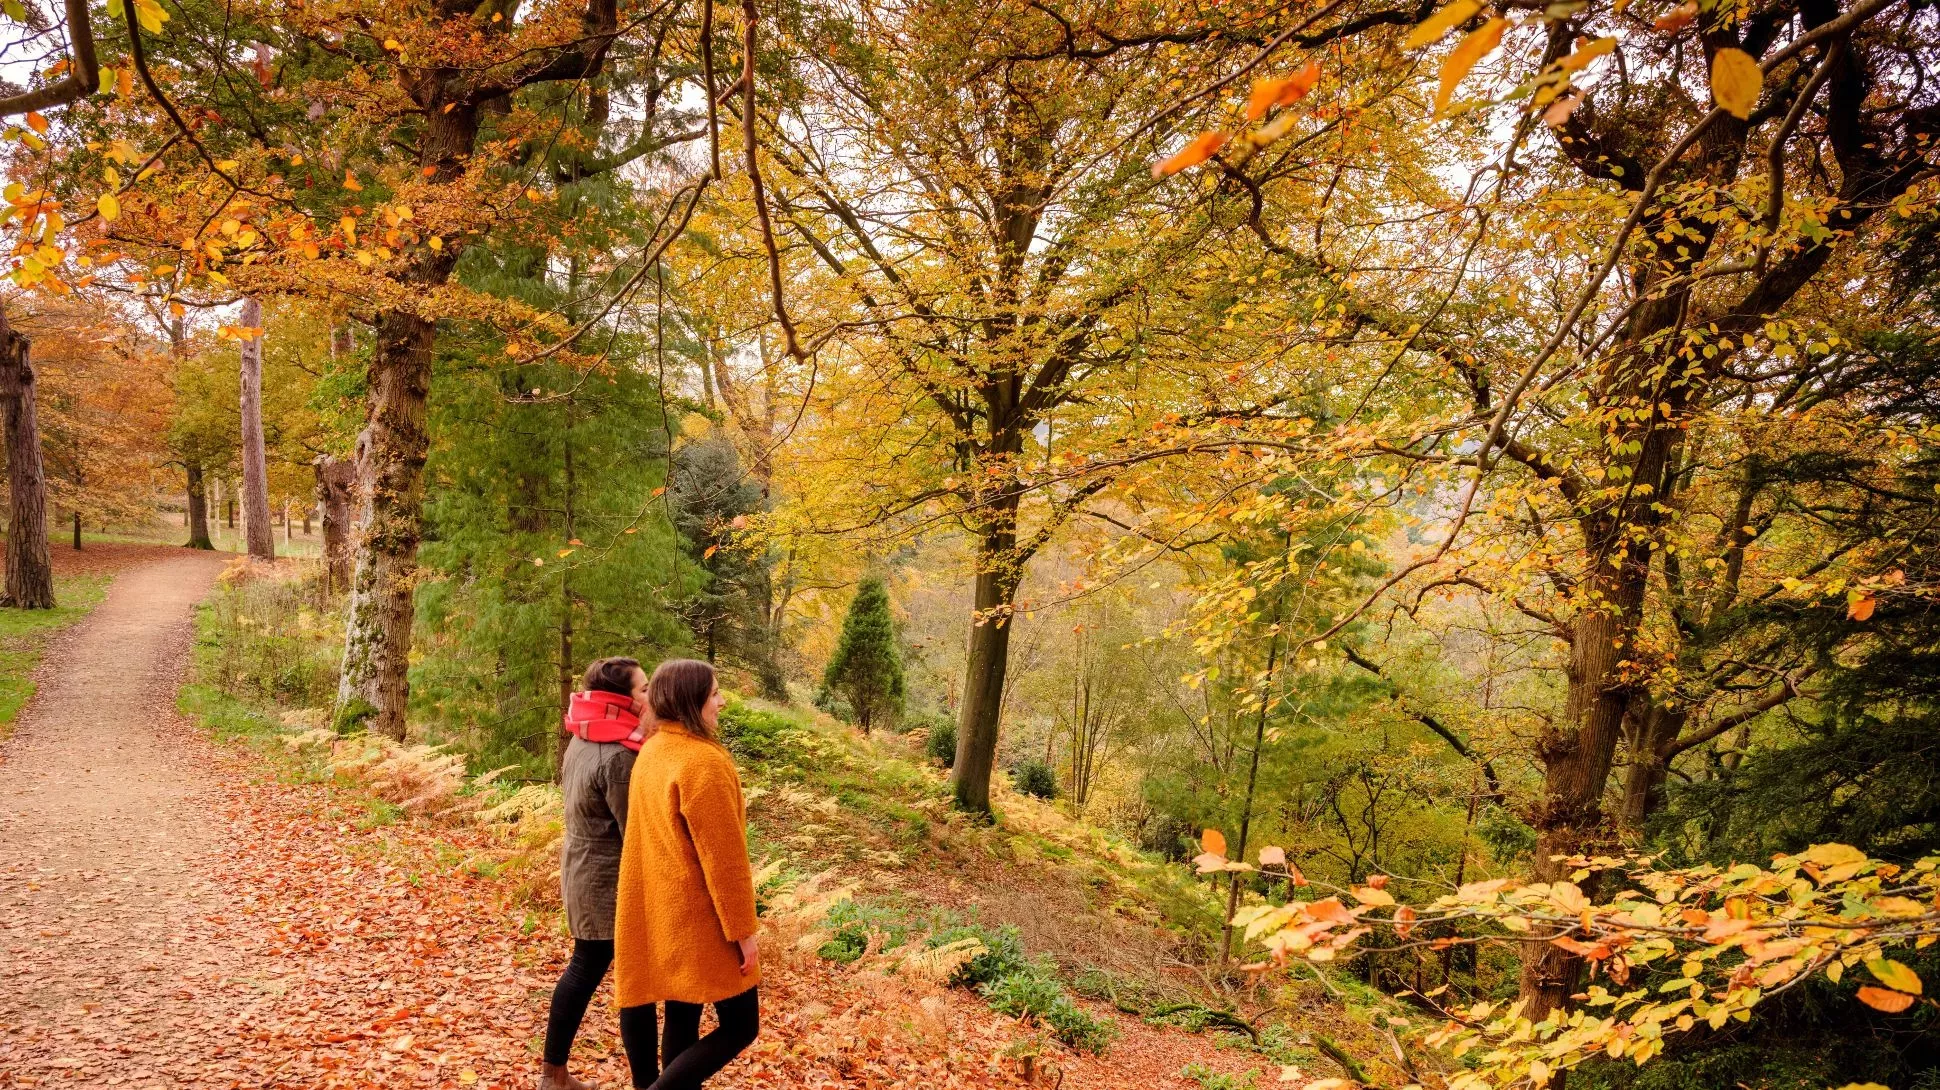 A pair of people on a path through an golden brown autumnal forest